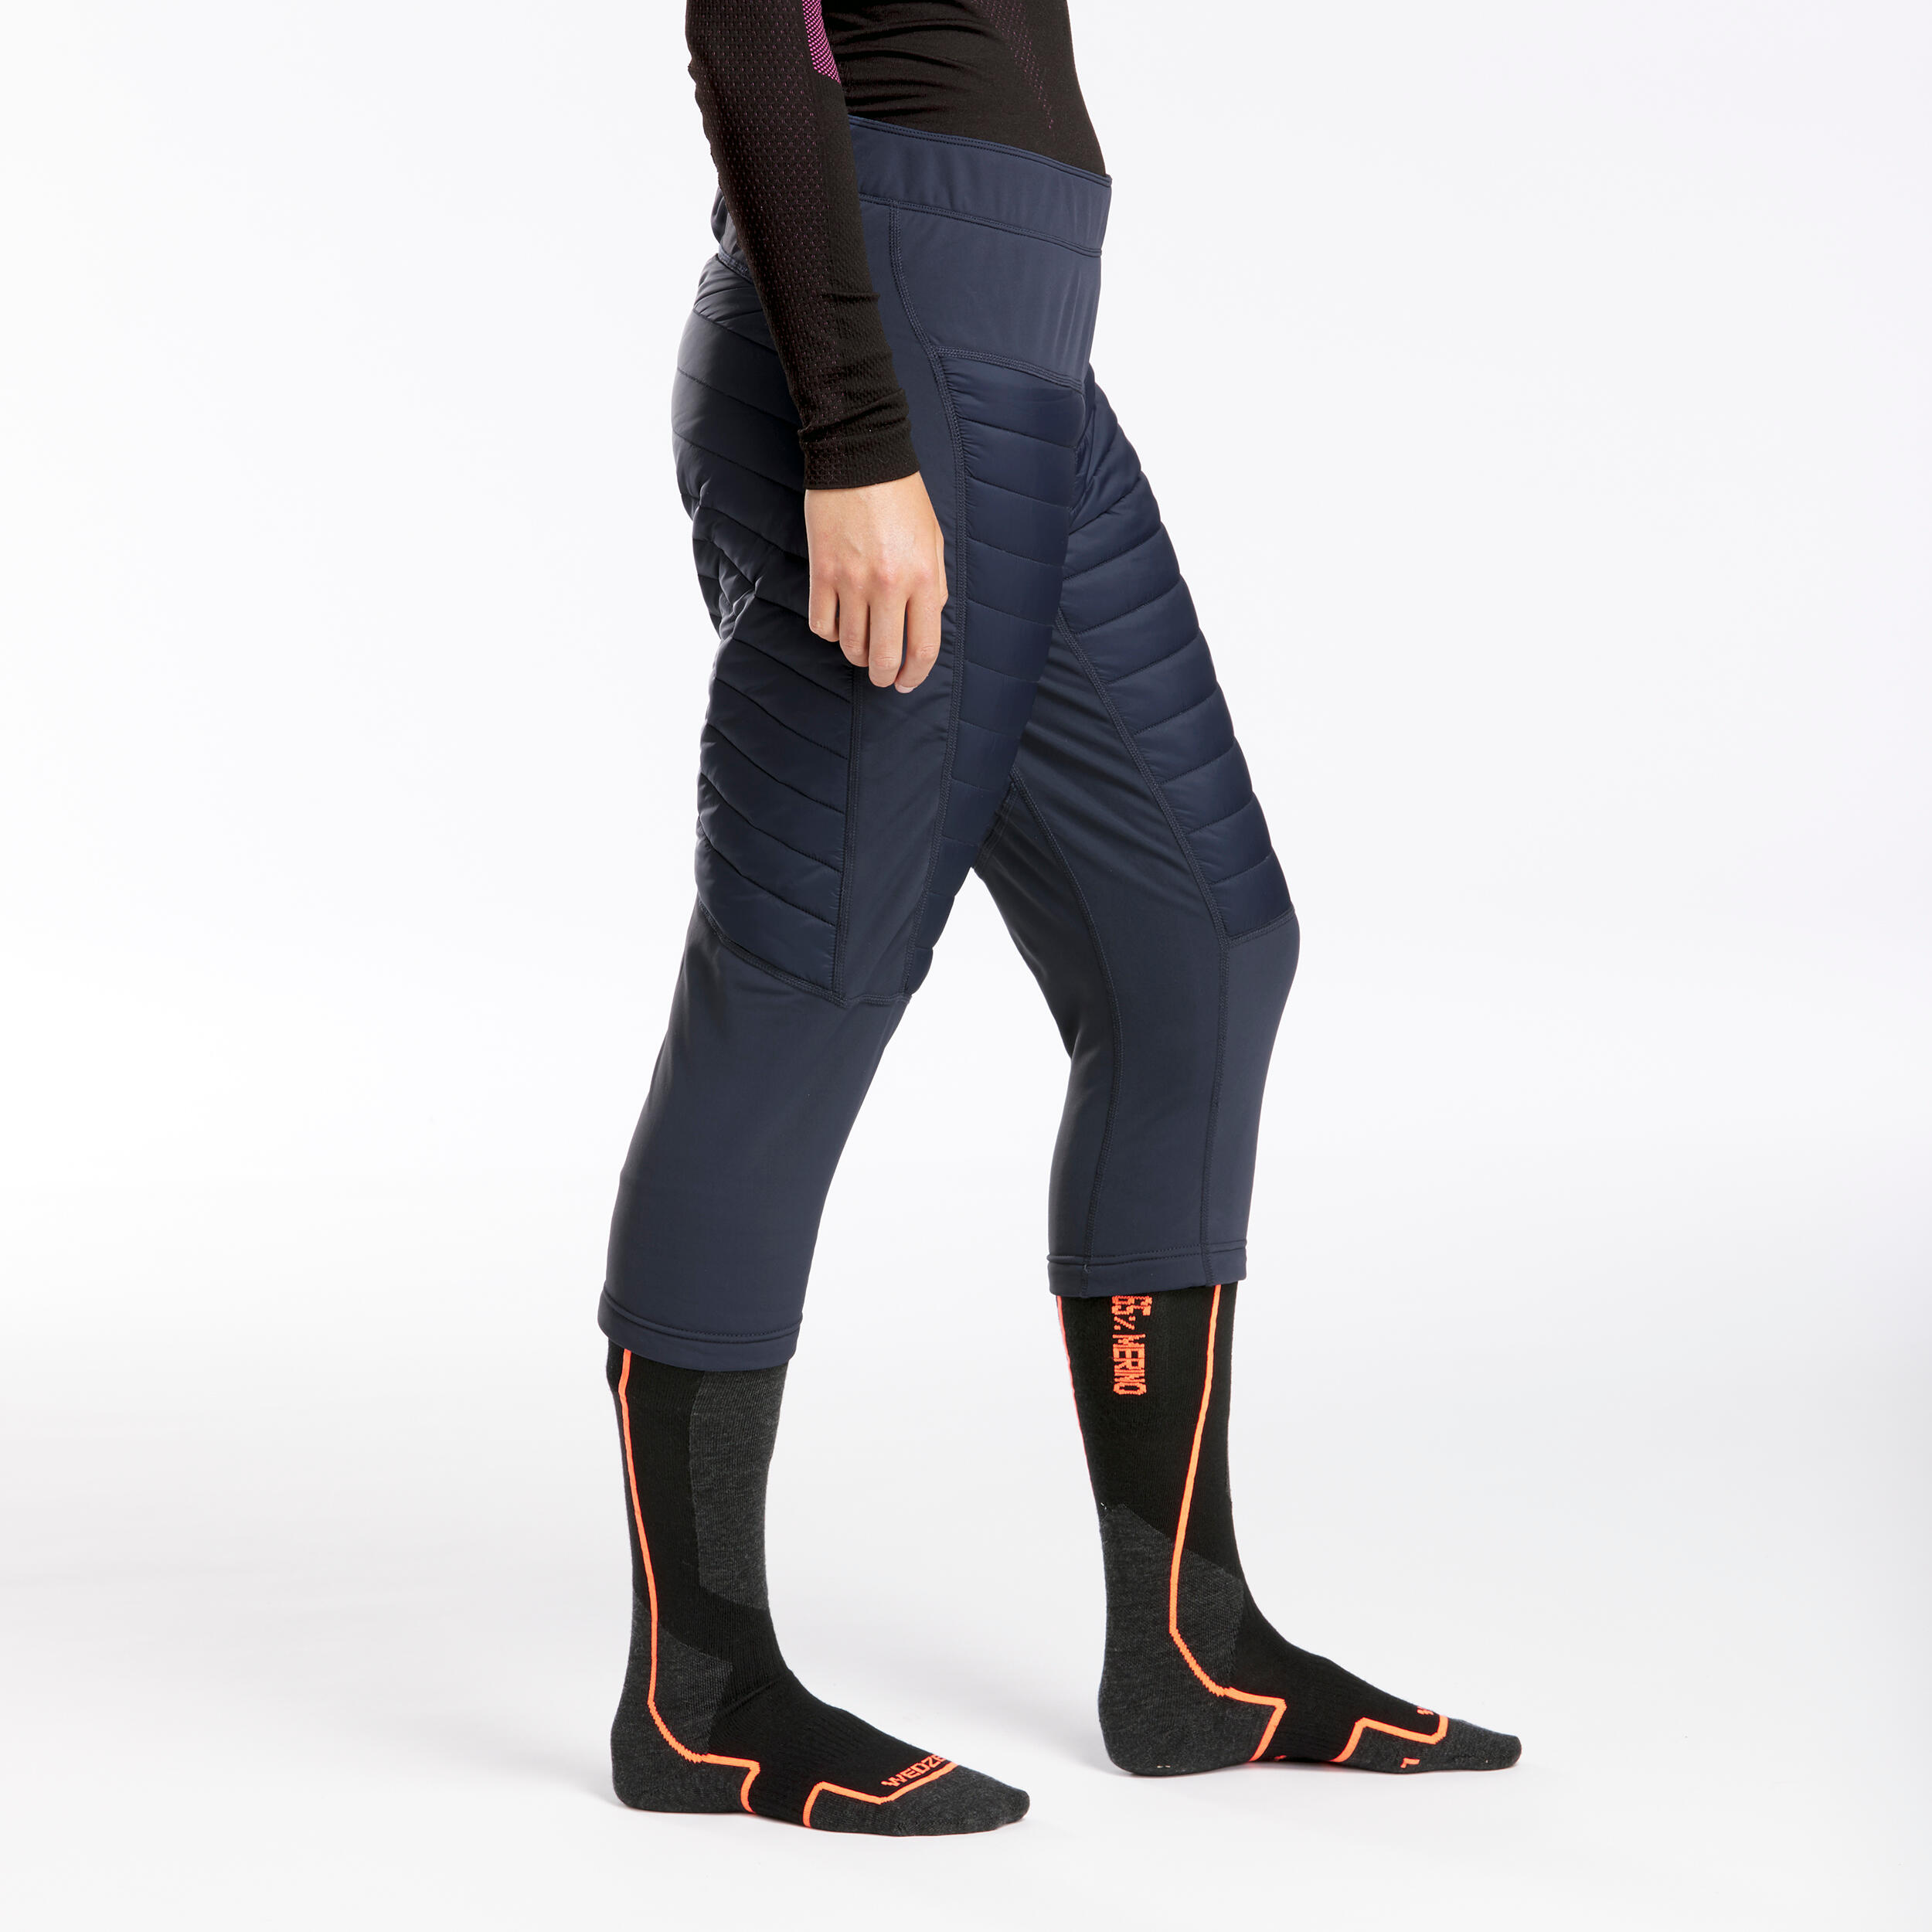 FDX Womens Base Layer Pants, Lightweight, Breathable, Quick Drying